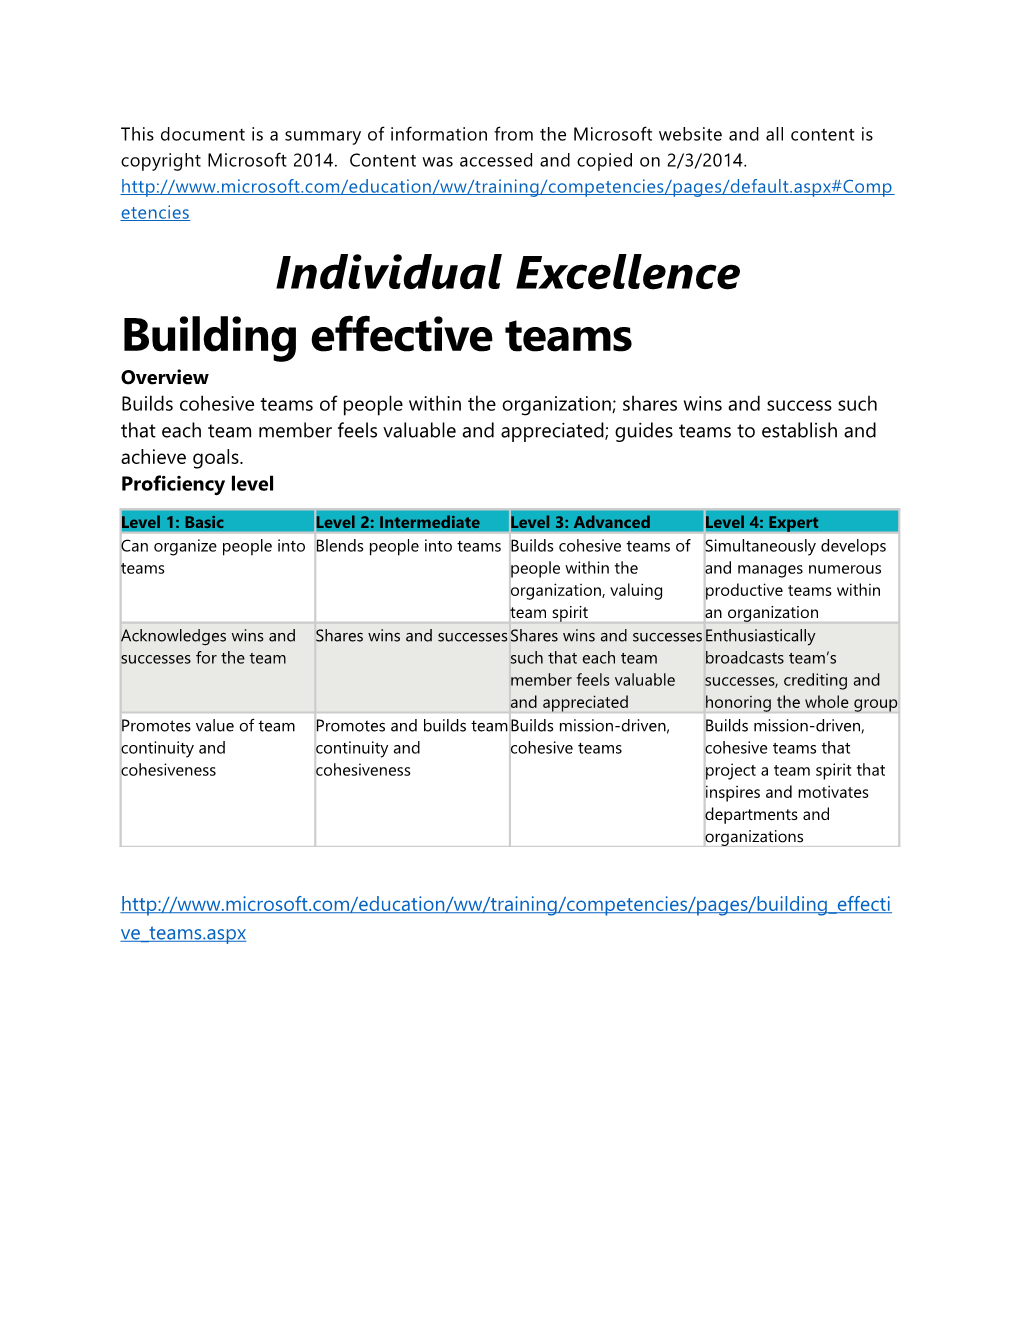 Individual Excellence